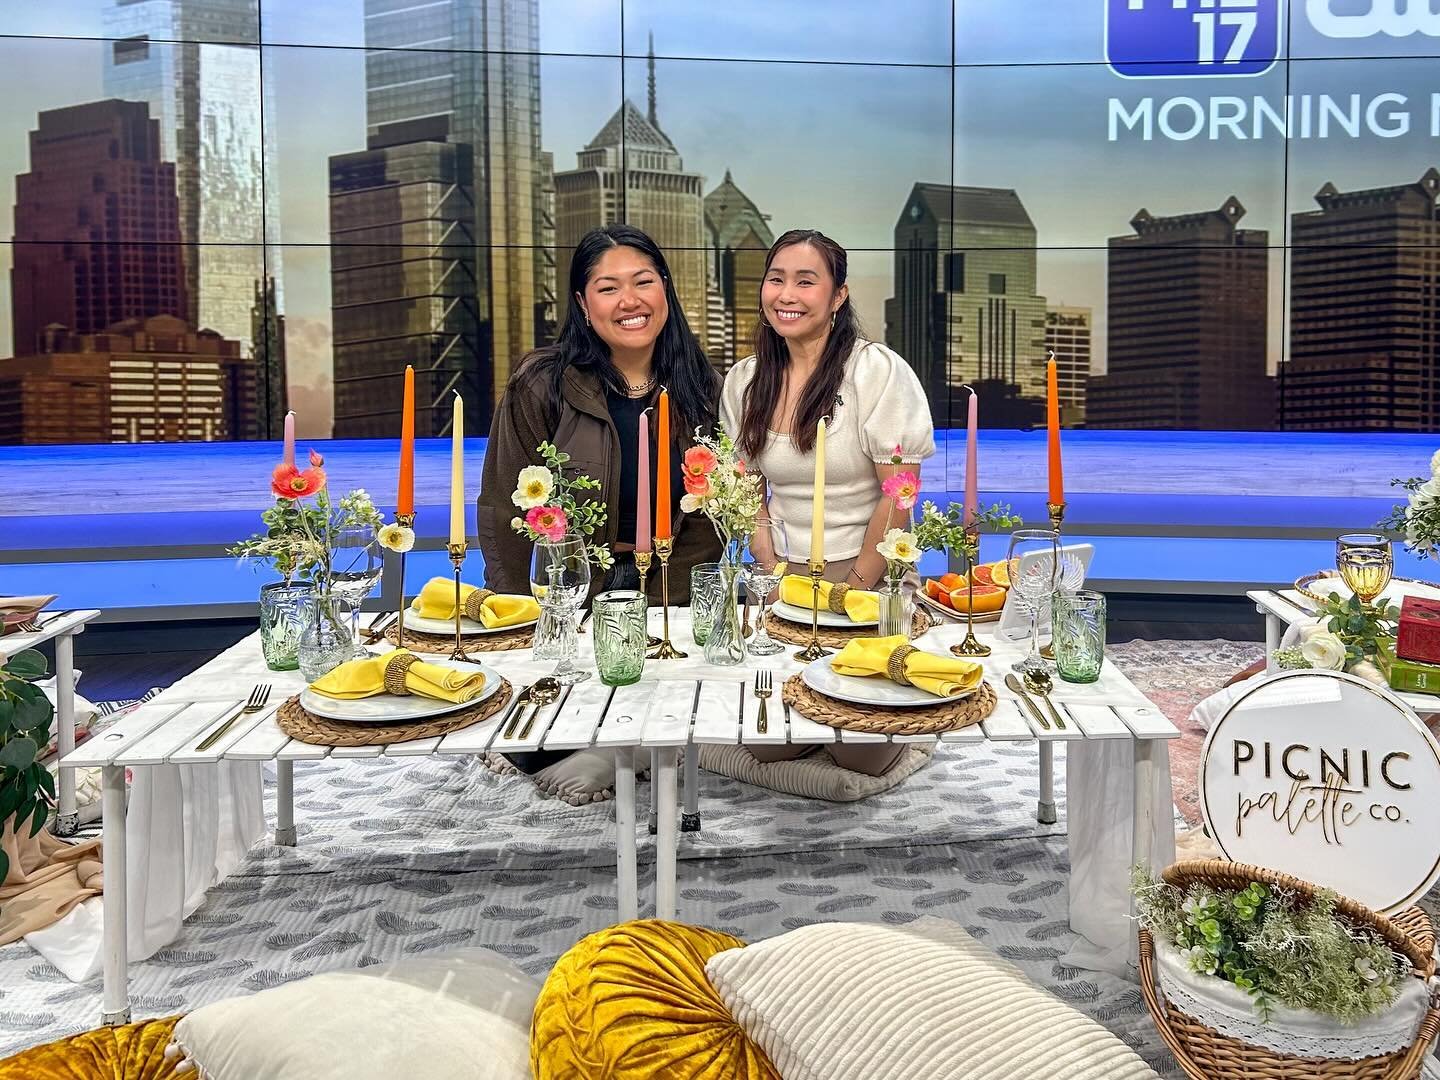 Happy National Picnic Day! 🧺✨ Picnic Palette Co. got a special feature on @phl17 today! 📺 Huge thanks to @jenlewishallphl17 for the opportunity &amp; for being the ultimate hype woman, and @monicaphl17 for making me feel at ease during the intervie